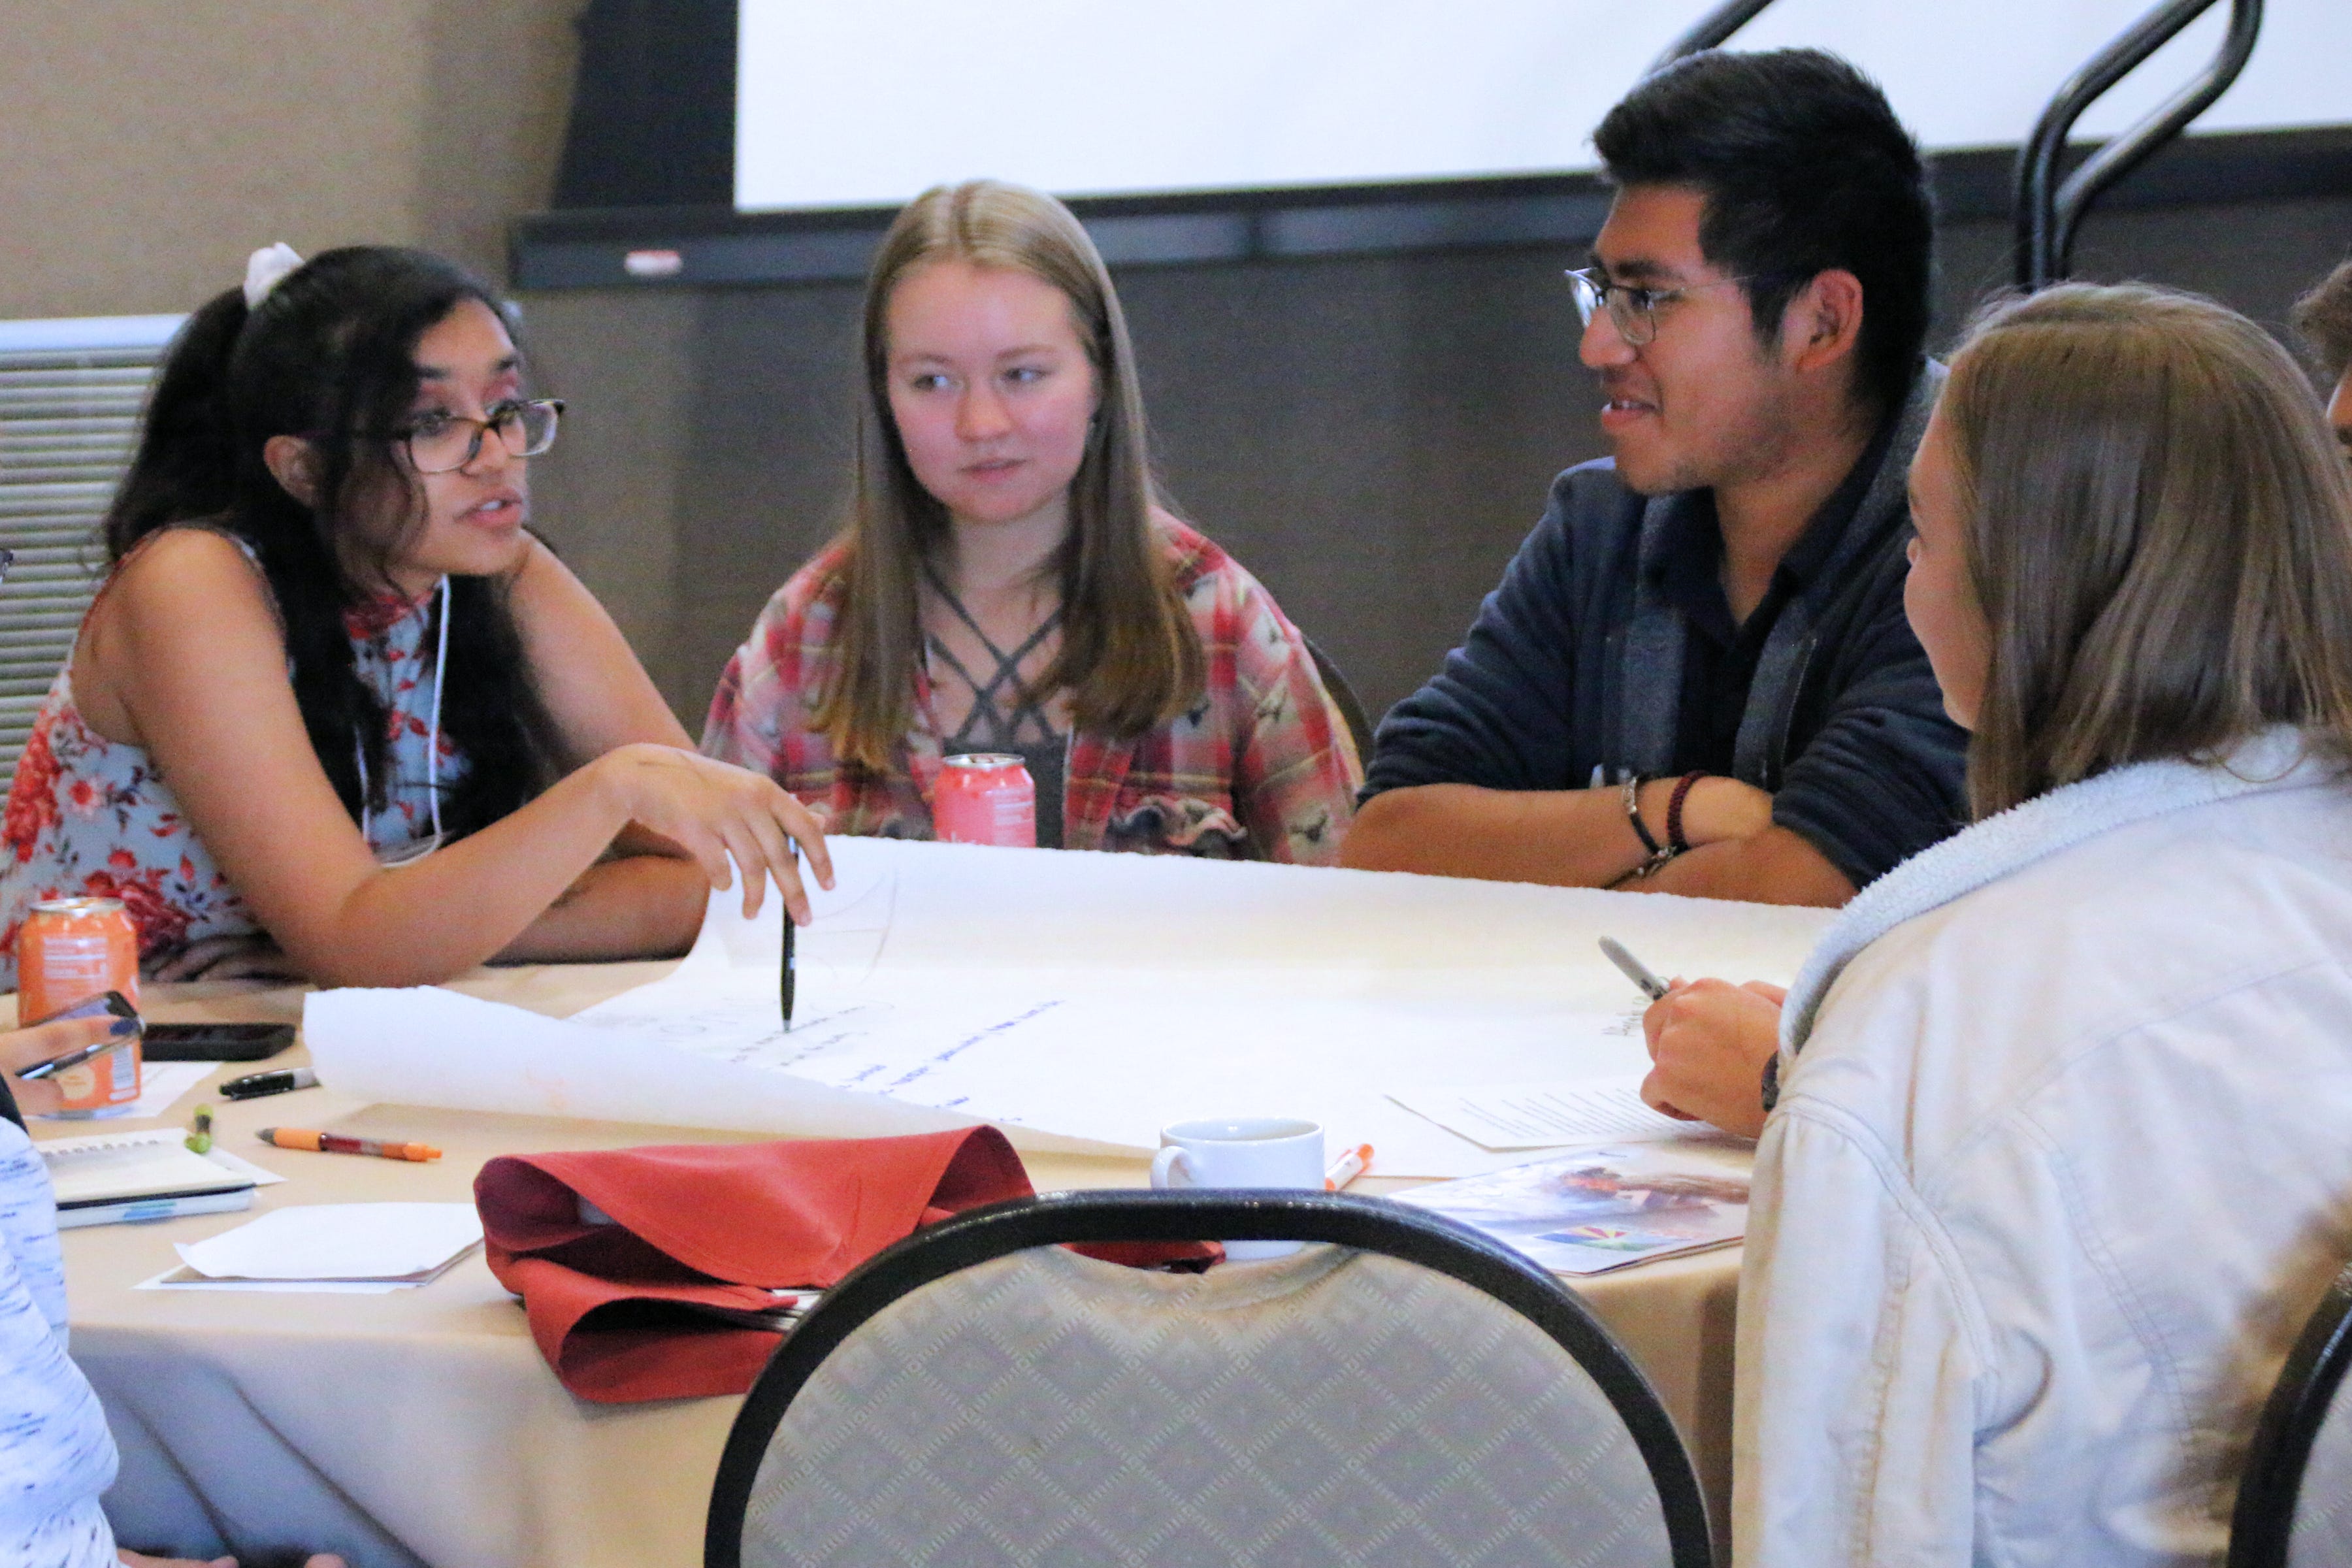 Aditi Narayanan (left) discusses ideas for economic solutions to address climate change, along with Ryan Harrop (center) and Brian Mecinas (right) during the youth forum at the conference “Climate 2020: Seven Generations for Arizona” at Northern Arizona University in Flagstaff on Nov. 16, 2019.